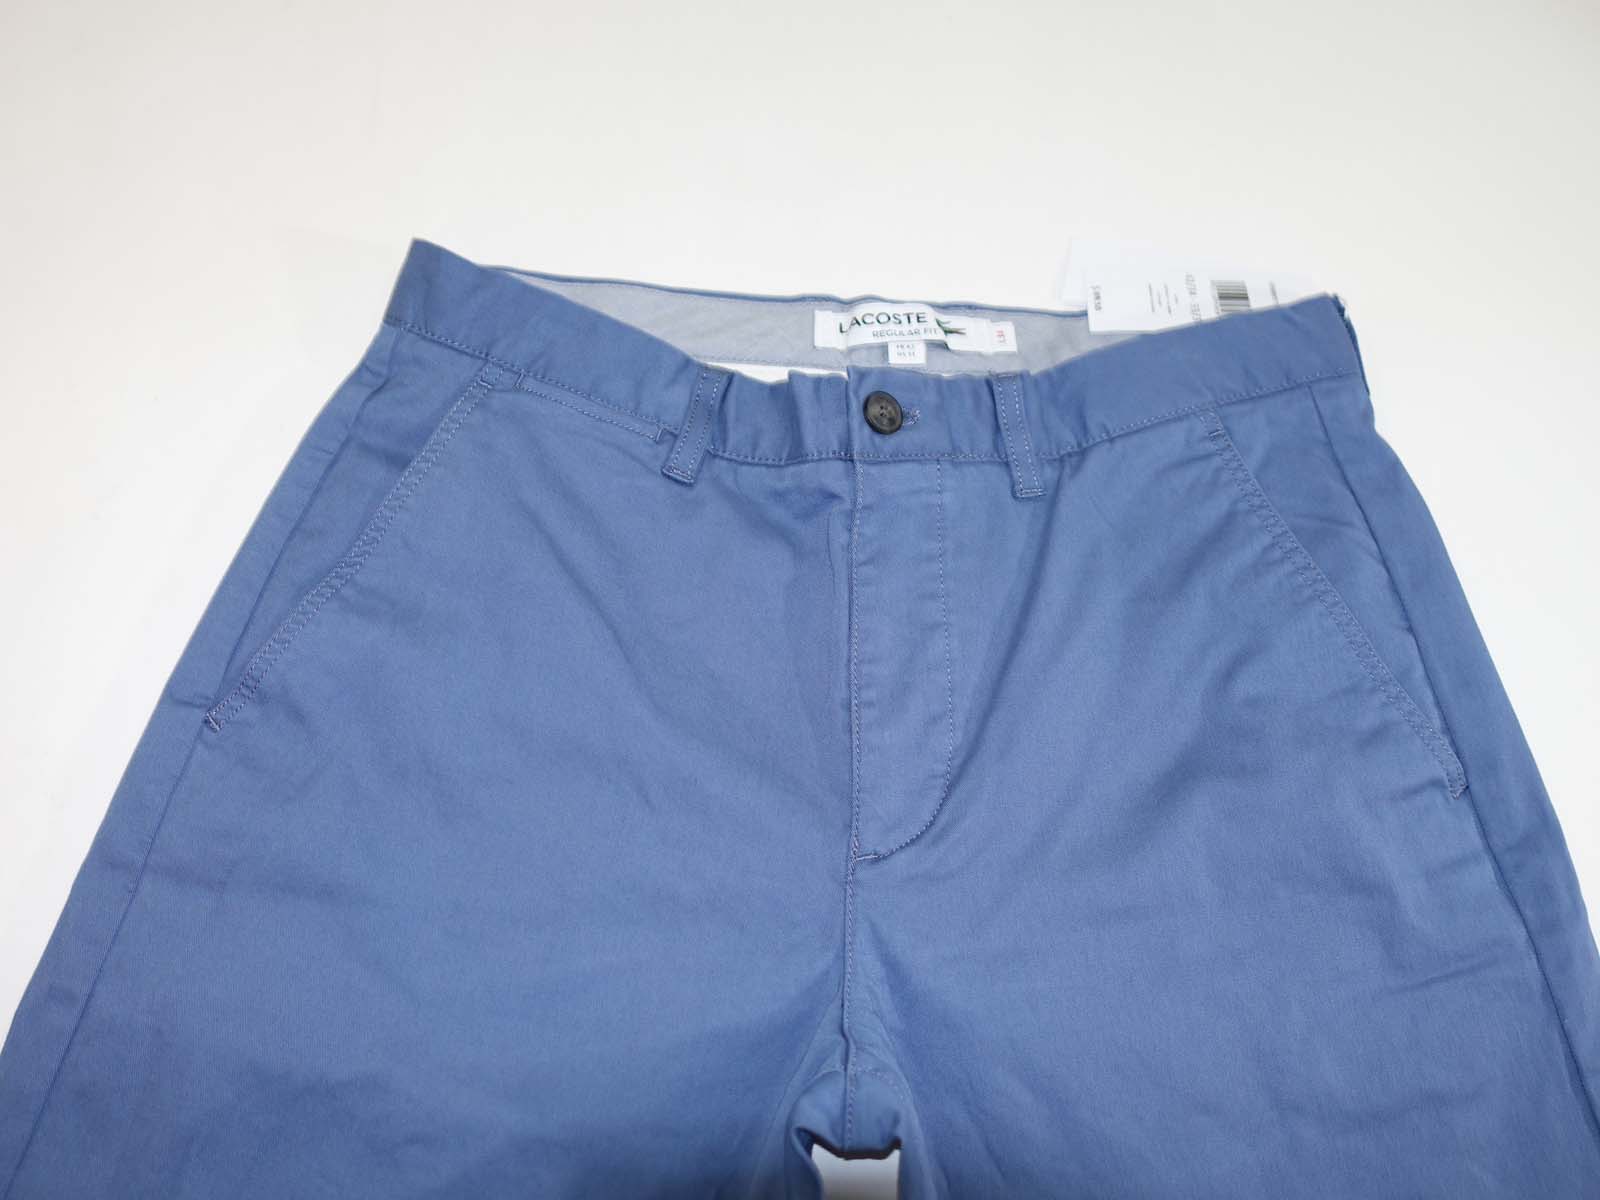 Lacoste Men's Regular Fit Stretch Chino Pants 33 x 34 NWT Blue Cotton ...